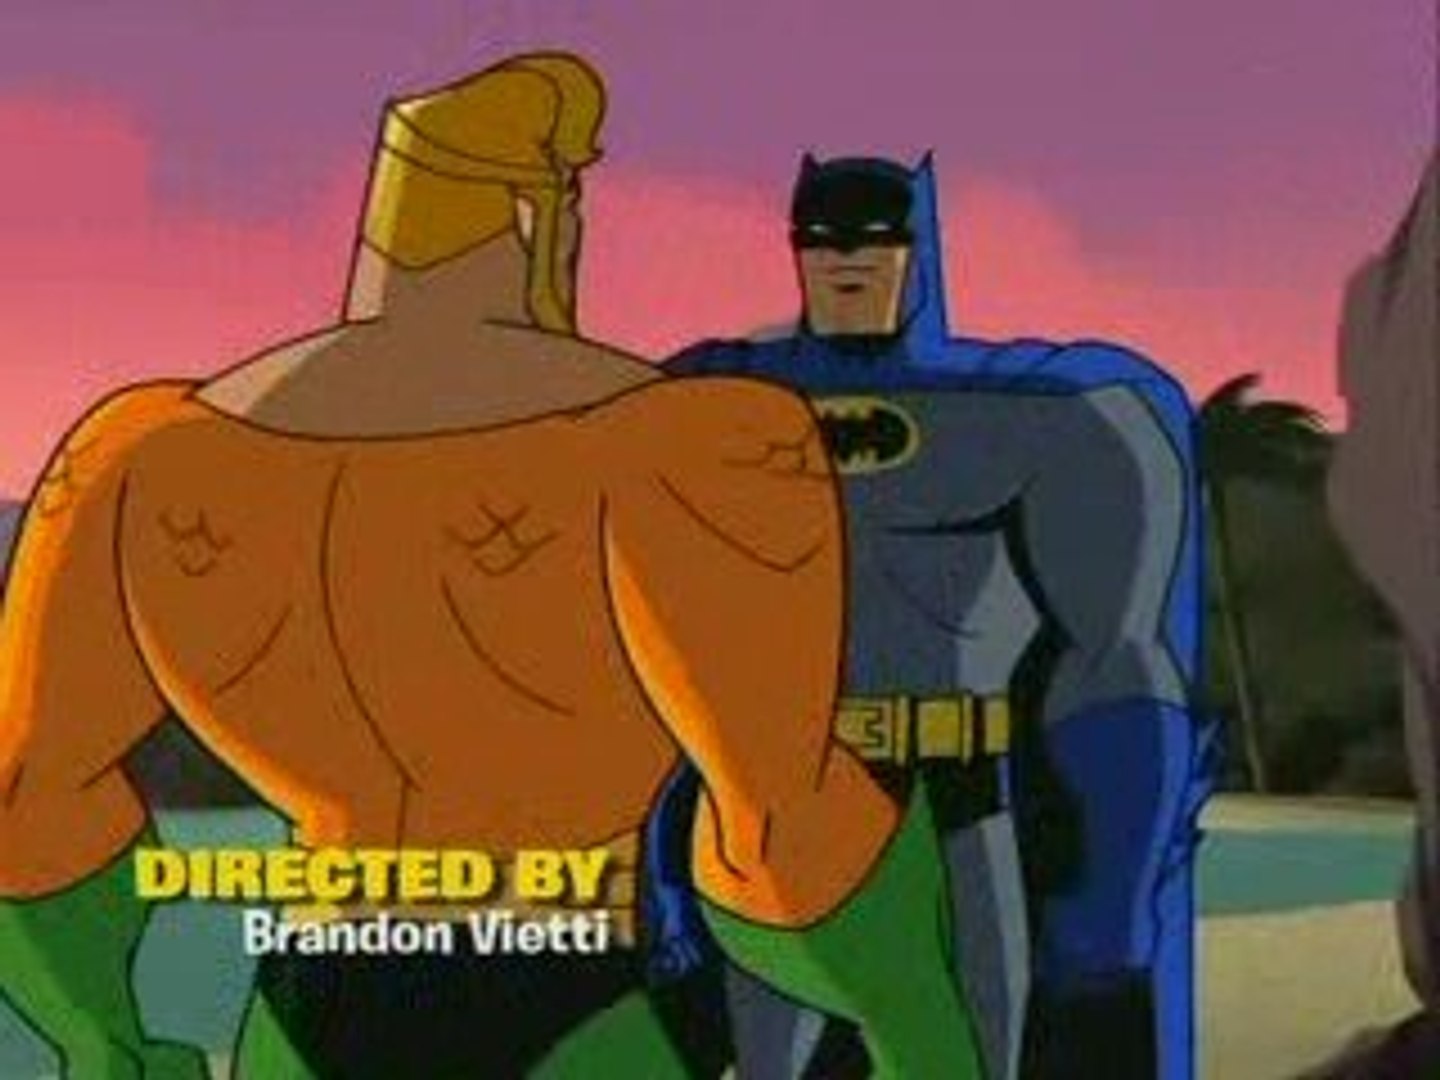 Batman: The Brave and the Bold Batman: The Brave and the Bold S02